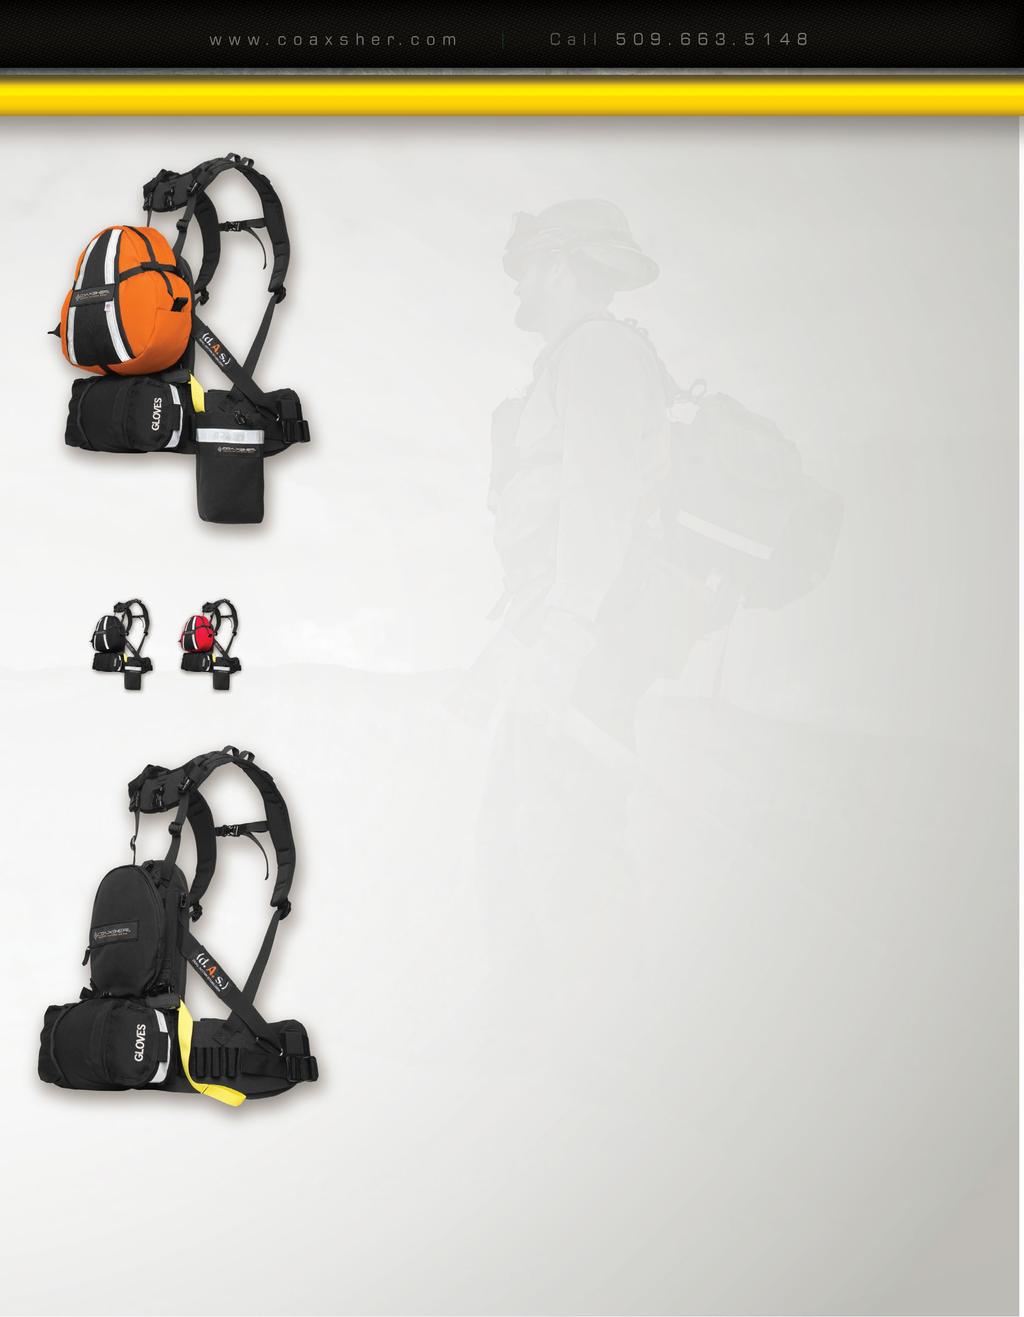 FS-1 Spotter When working as a wildland firefighter, you need equipment that is compact, lightweight and durable yet spacious enough to hold necessities.